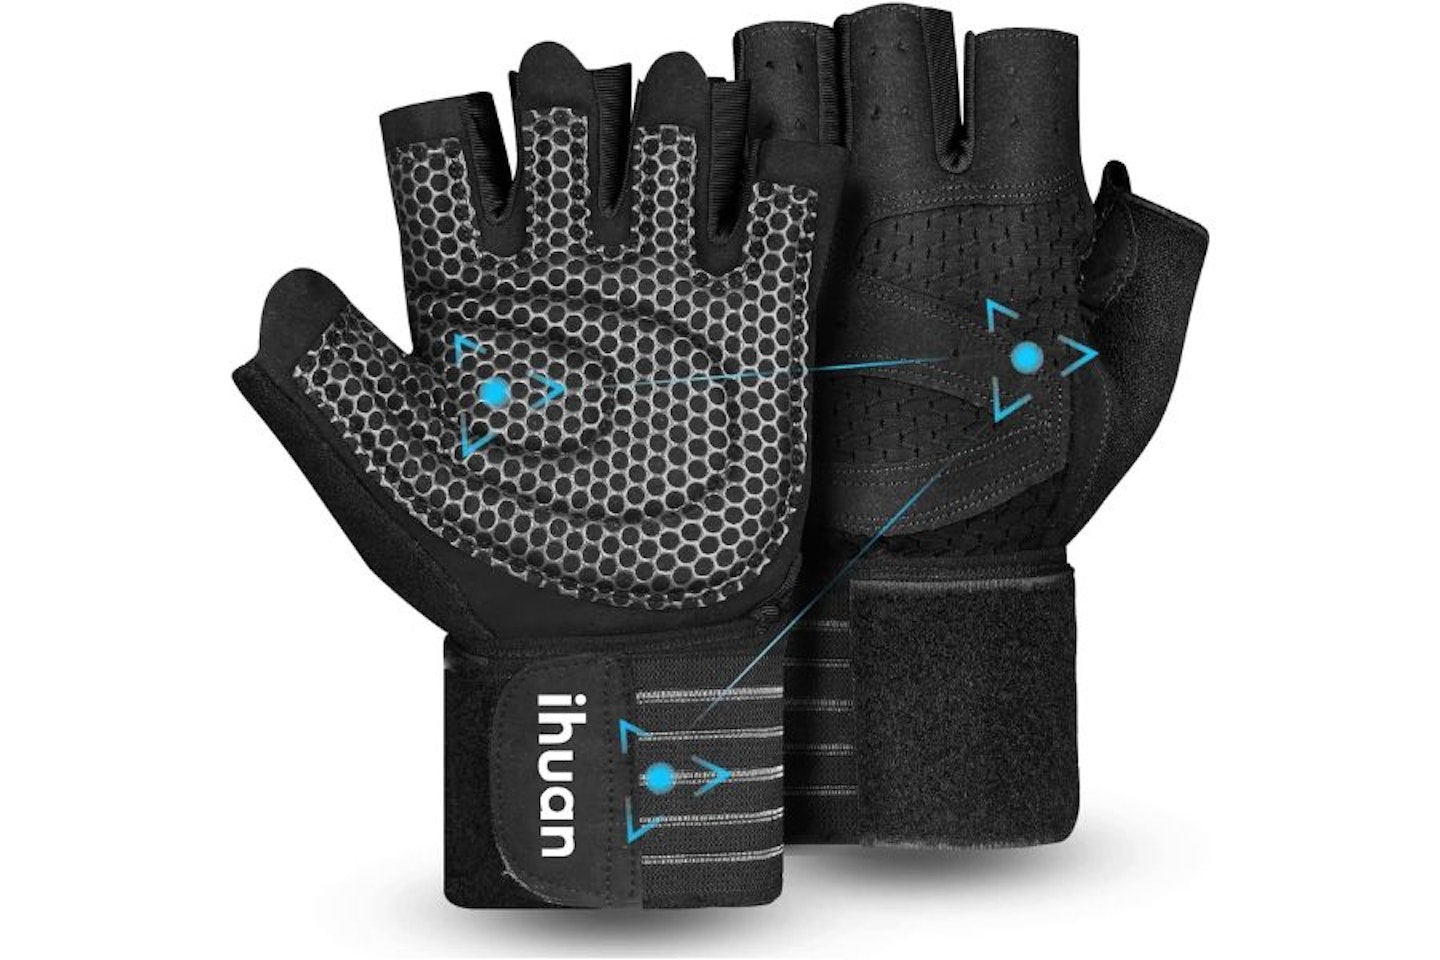 ihuan Ventilated Weight Lifting Workout Gloves